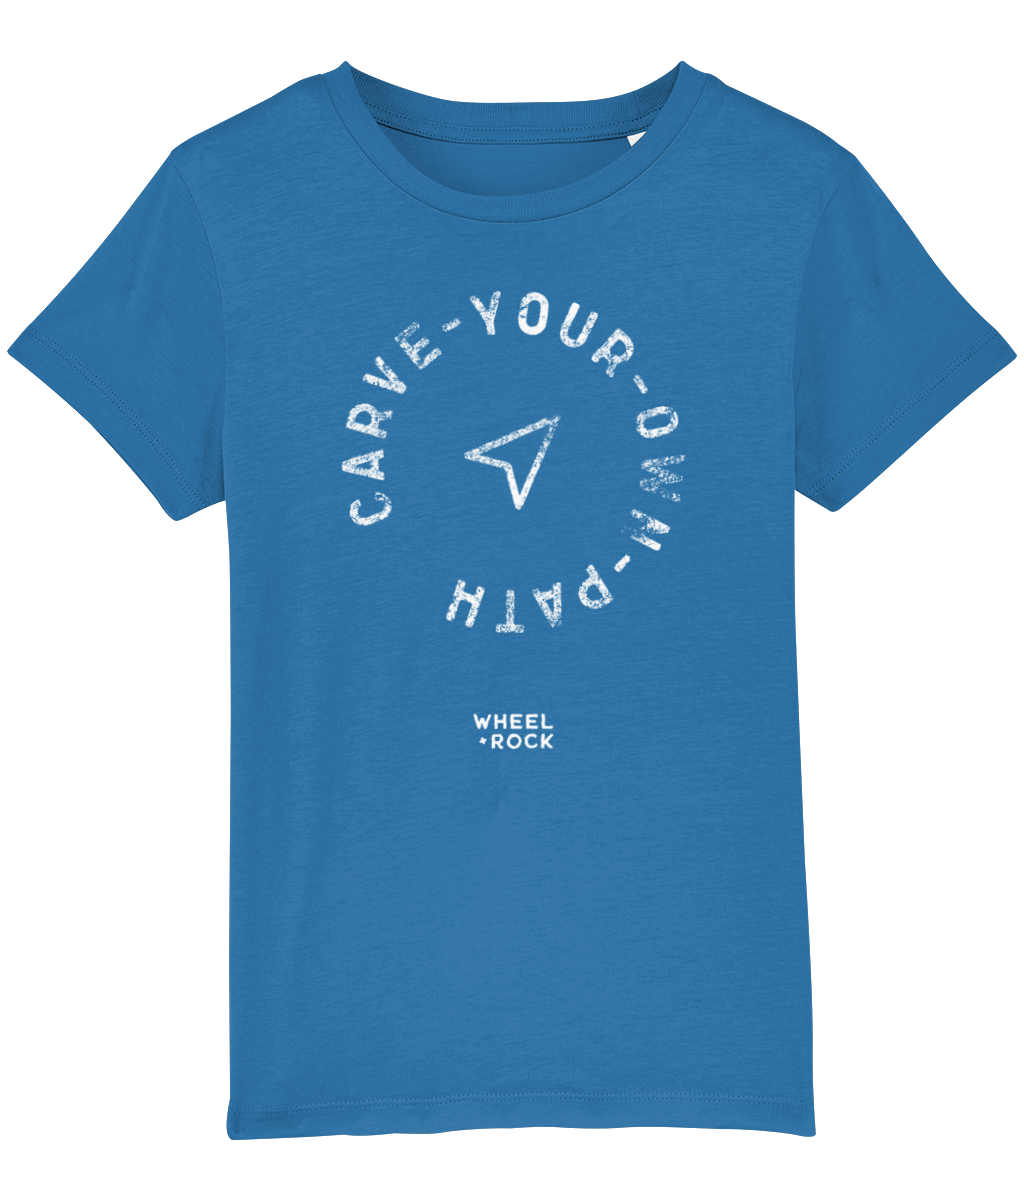 Carve Your Own Path - Kids Tee - BLUES